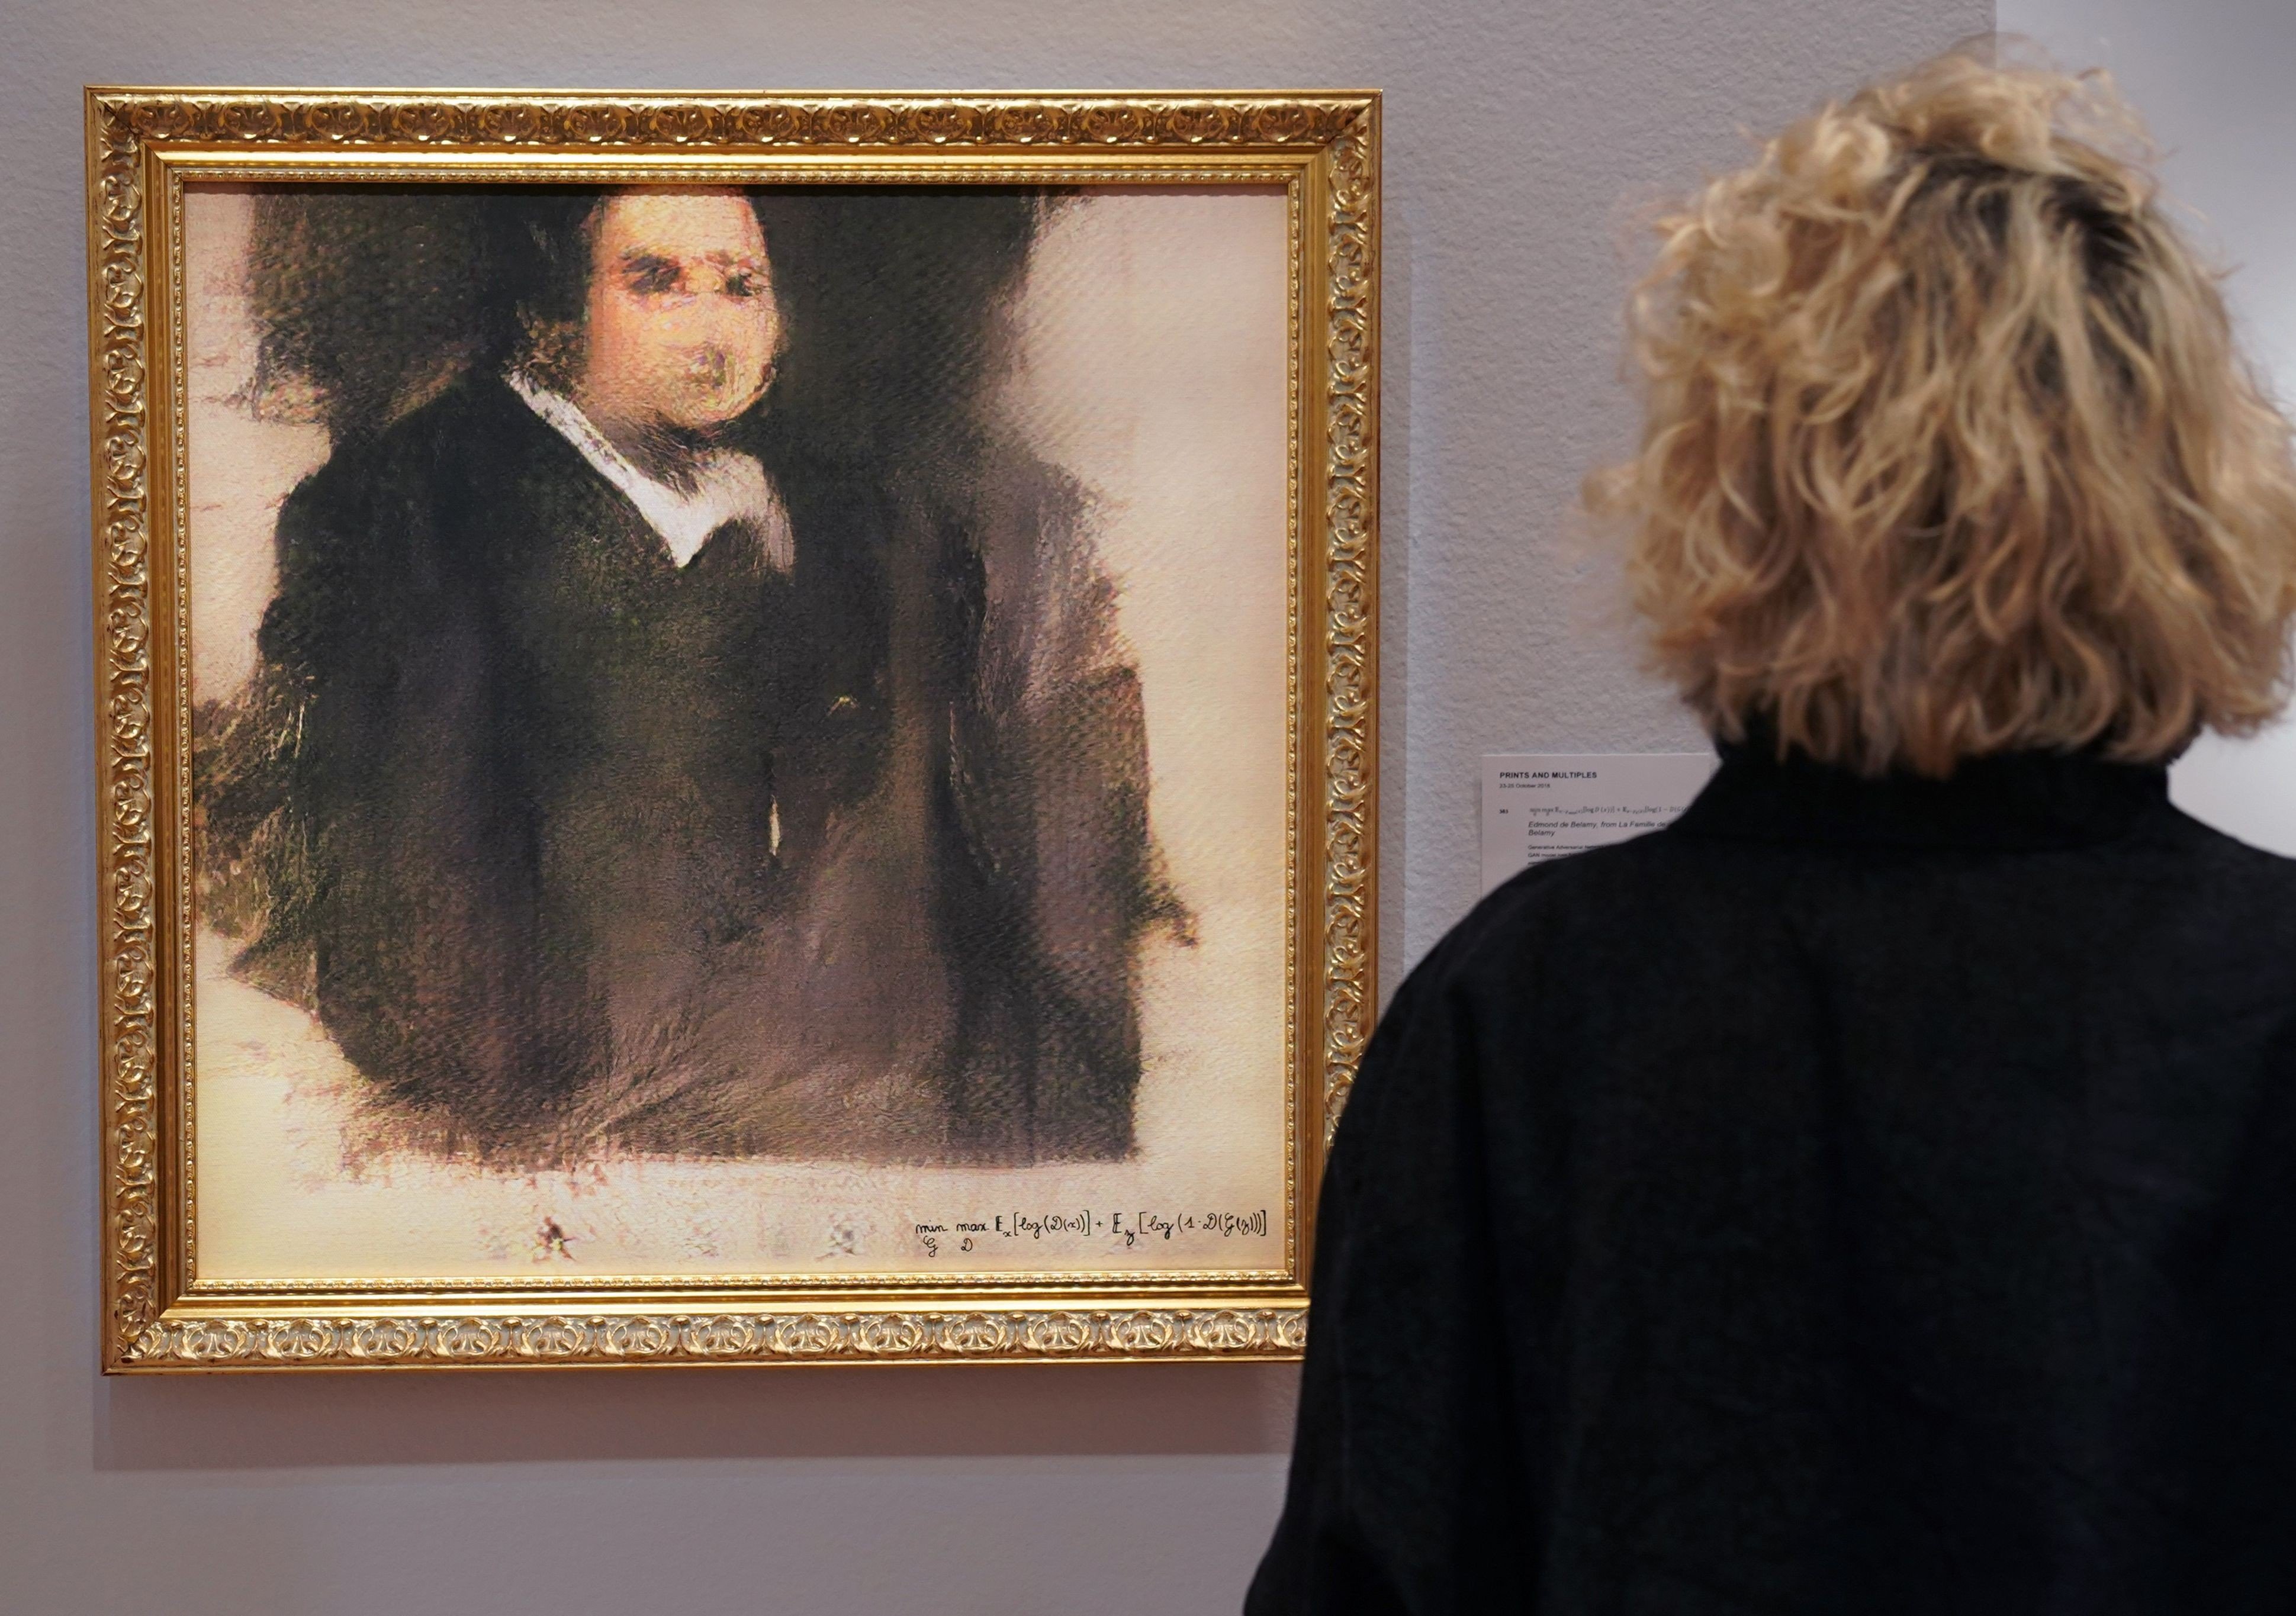 "Portrait of Edmond de Belamy," at Christie's in New York. Photo by TIMOTHY A. CLARY / AFP